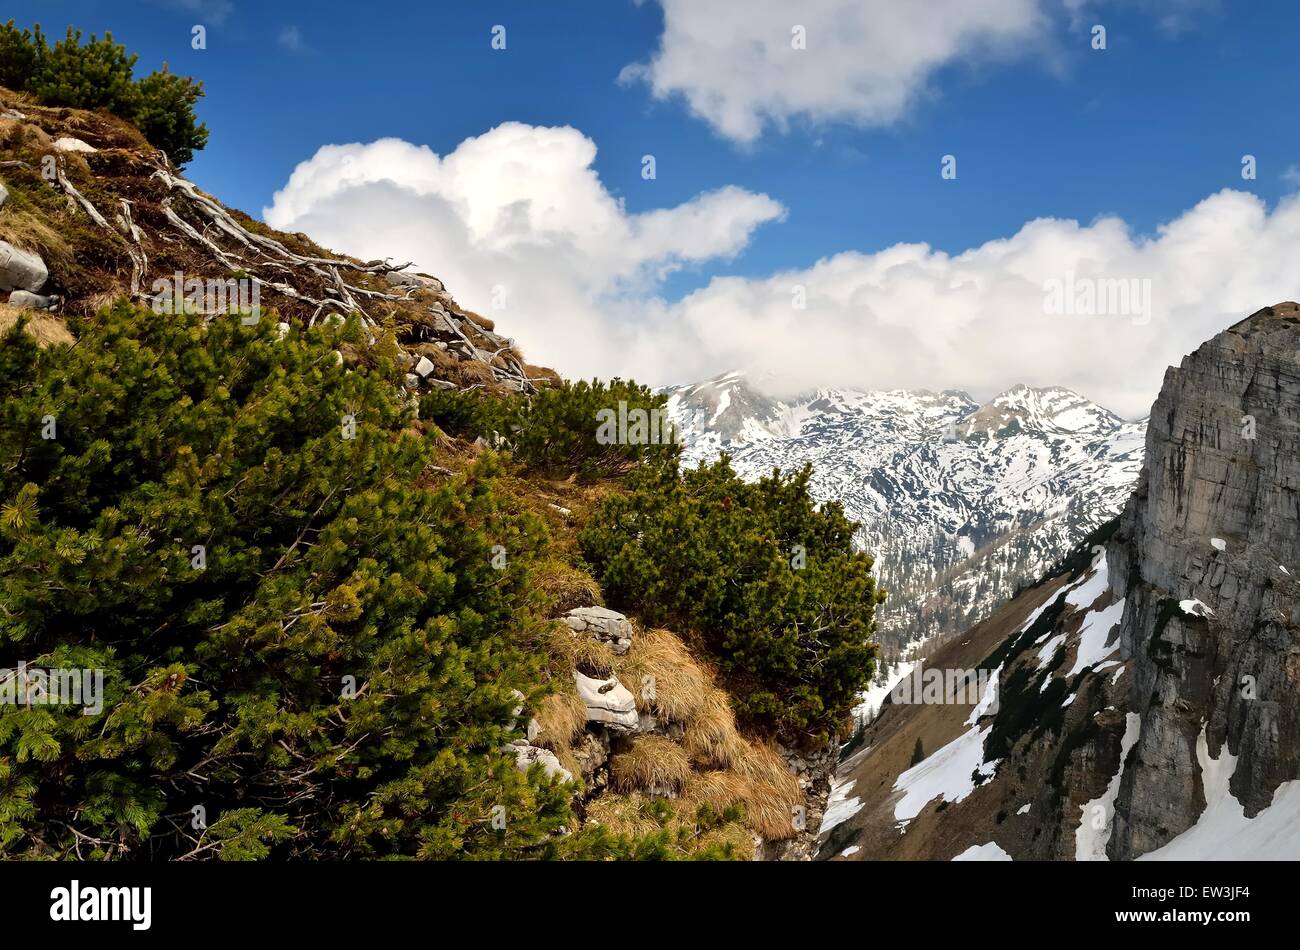 Mountain landscape. View from Loser peak over dwarf pine trees, steep rocky wall and summits covered with snow, Dead Mountains. Stock Photo